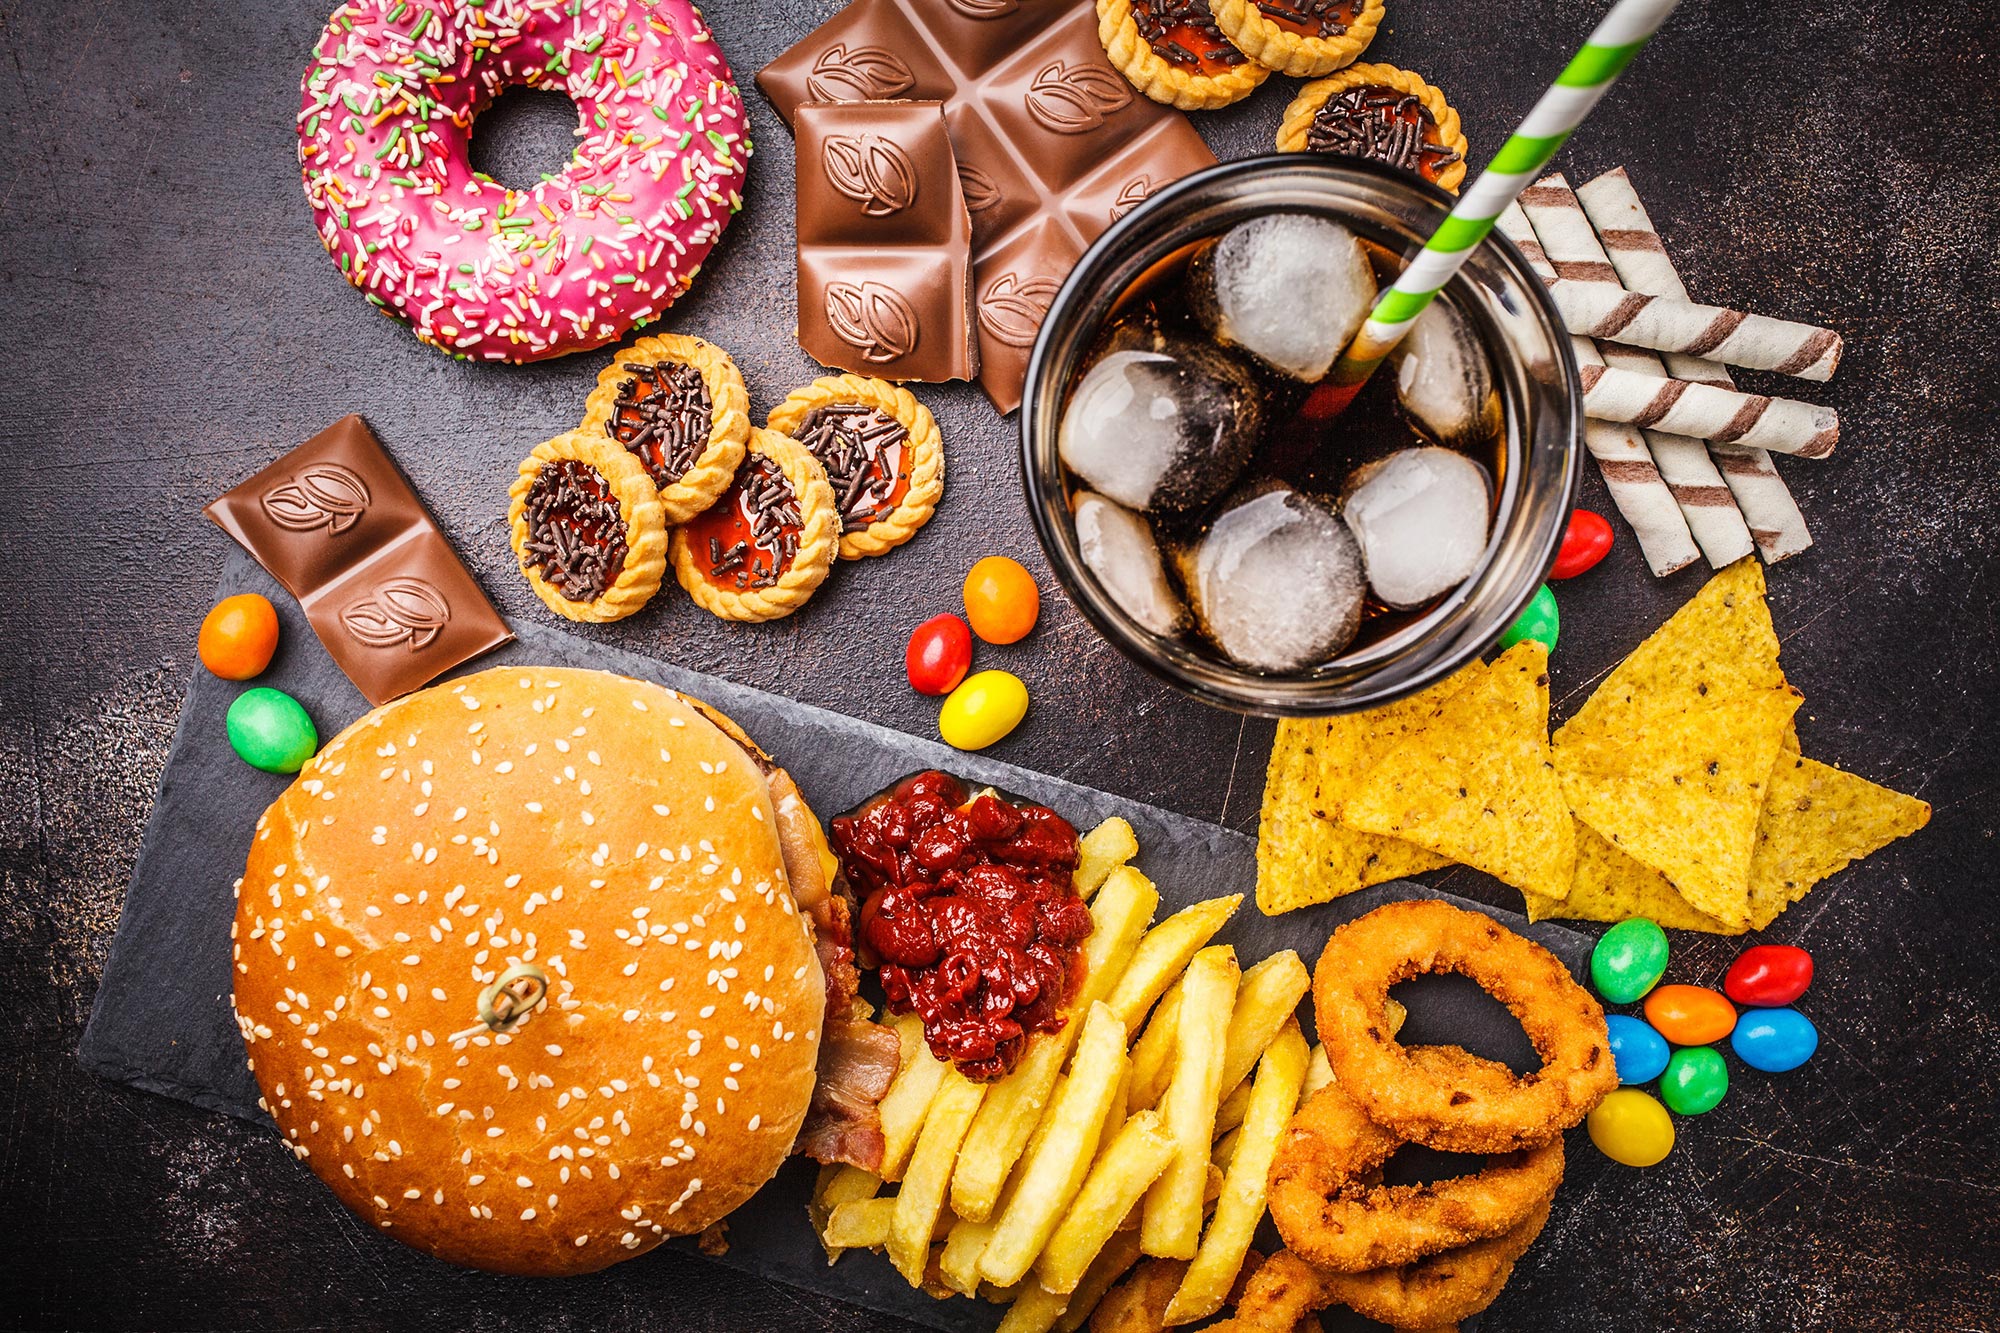 New Study Alarms: Ultra-Processed Foods Linked to Increased Risk of Cancer & Death - SciTechDaily